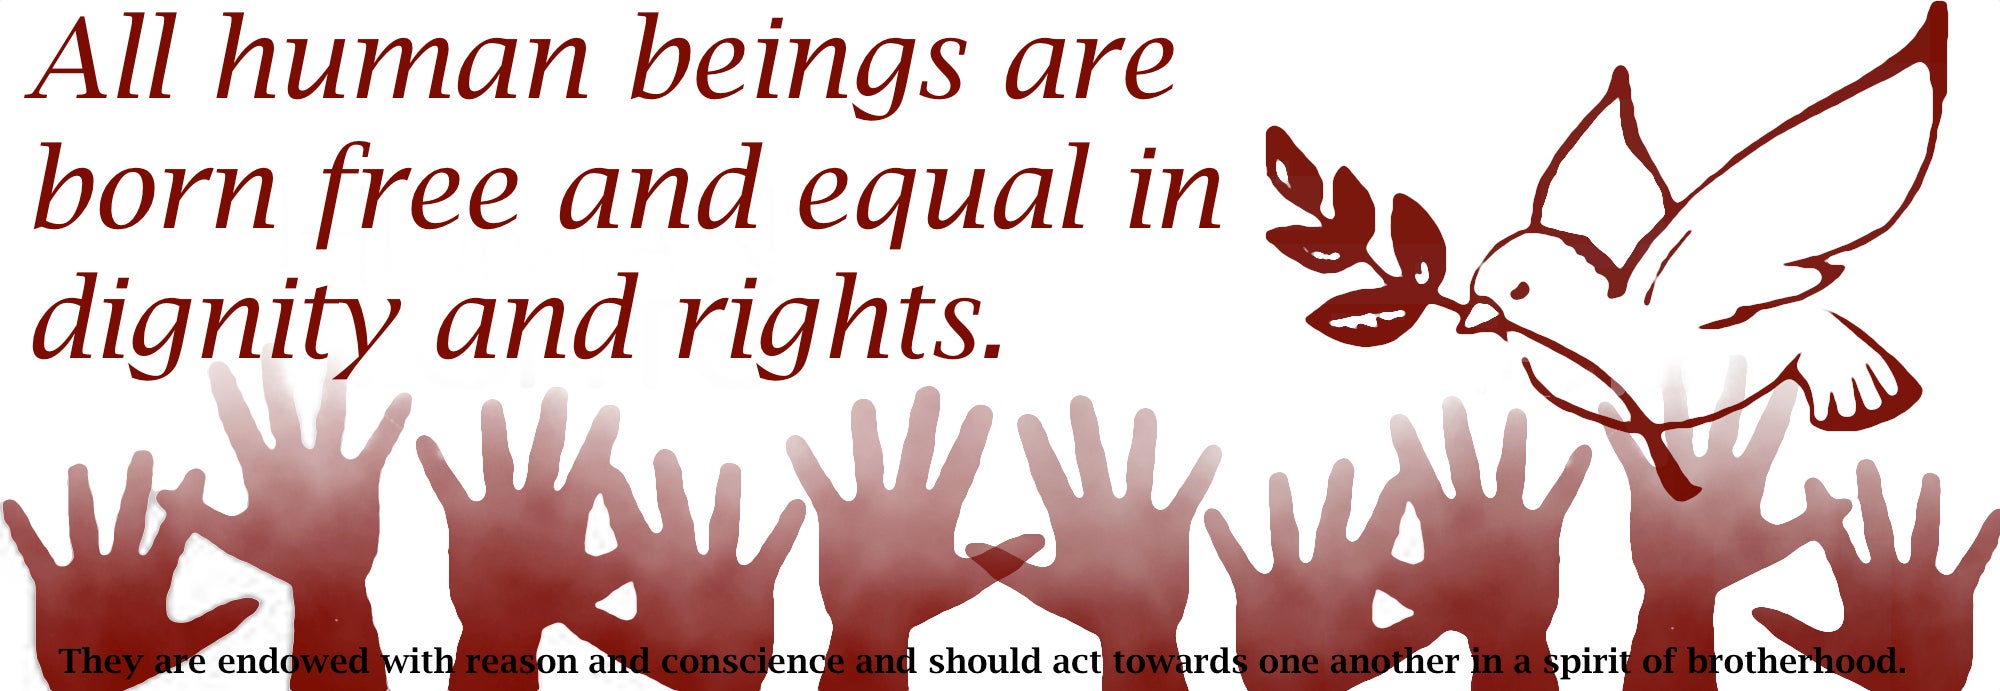 clip art for human rights - photo #39